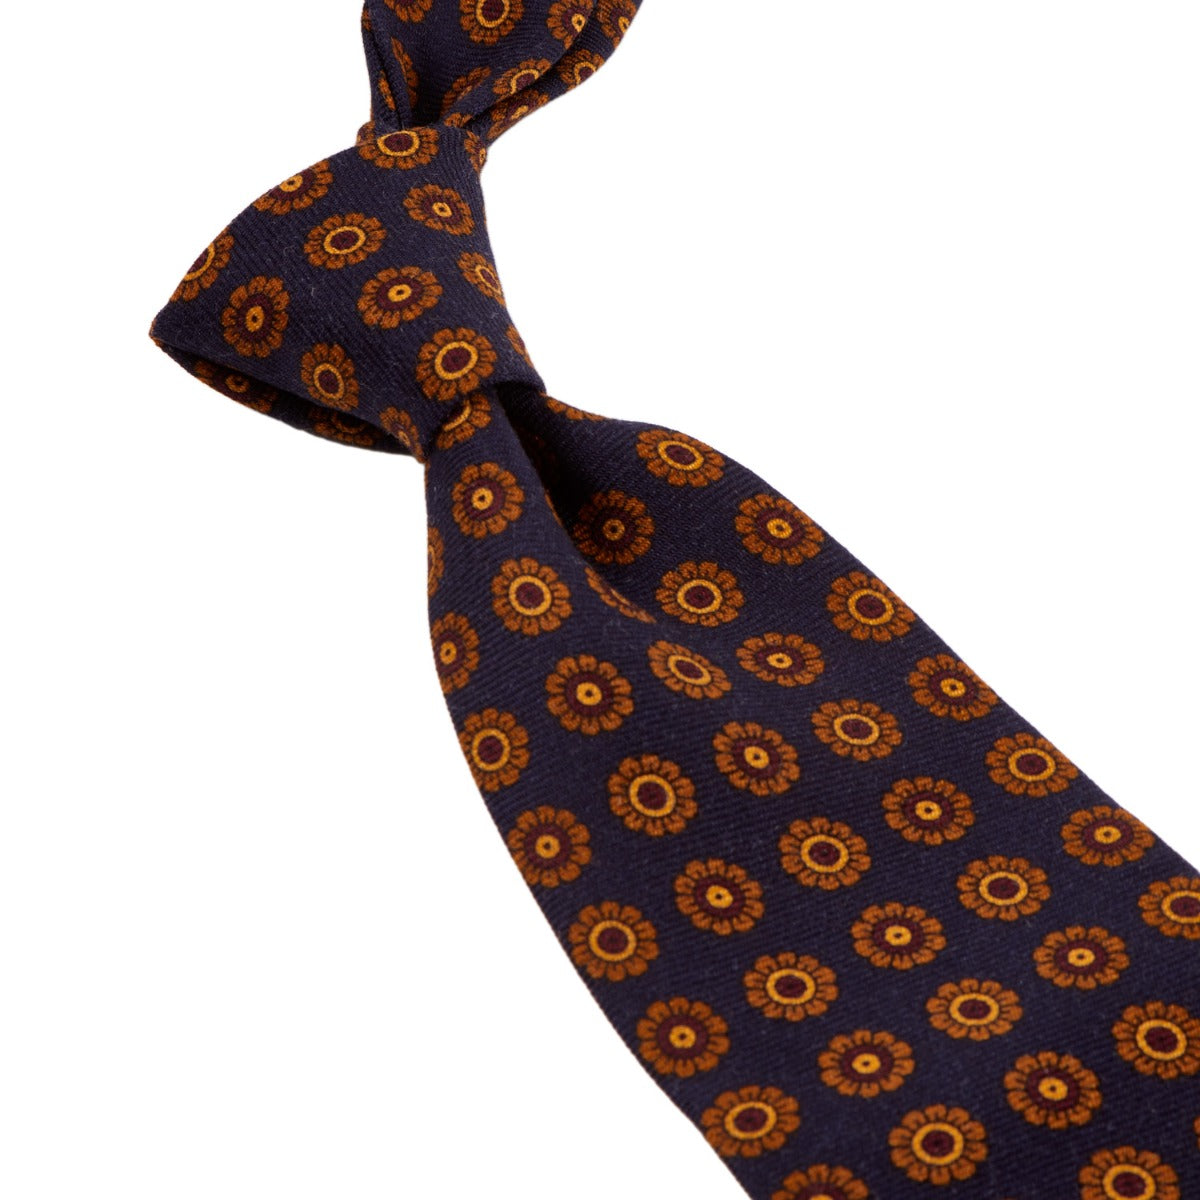 A Sovereign Grade Navy Daisy Wool Challis Tie with orange and blue flowers on it from KirbyAllison.com, United Kingdom.